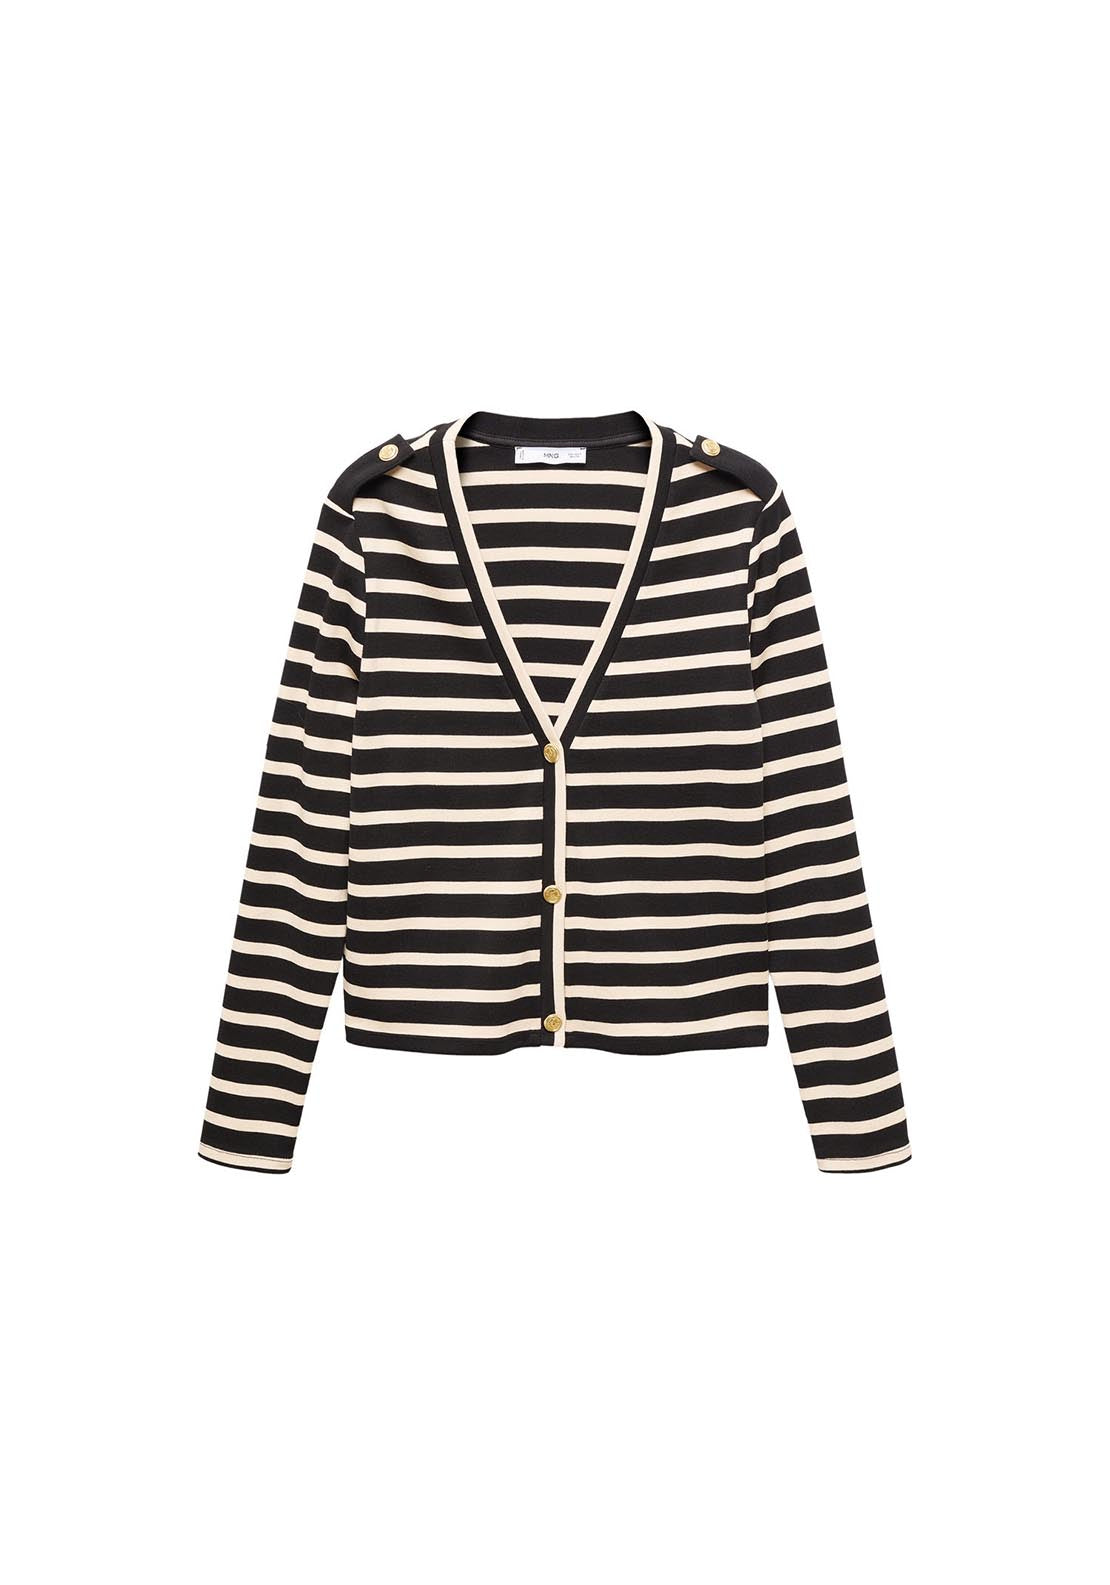 Mango Striped cardigan with buttons 7 Shaws Department Stores